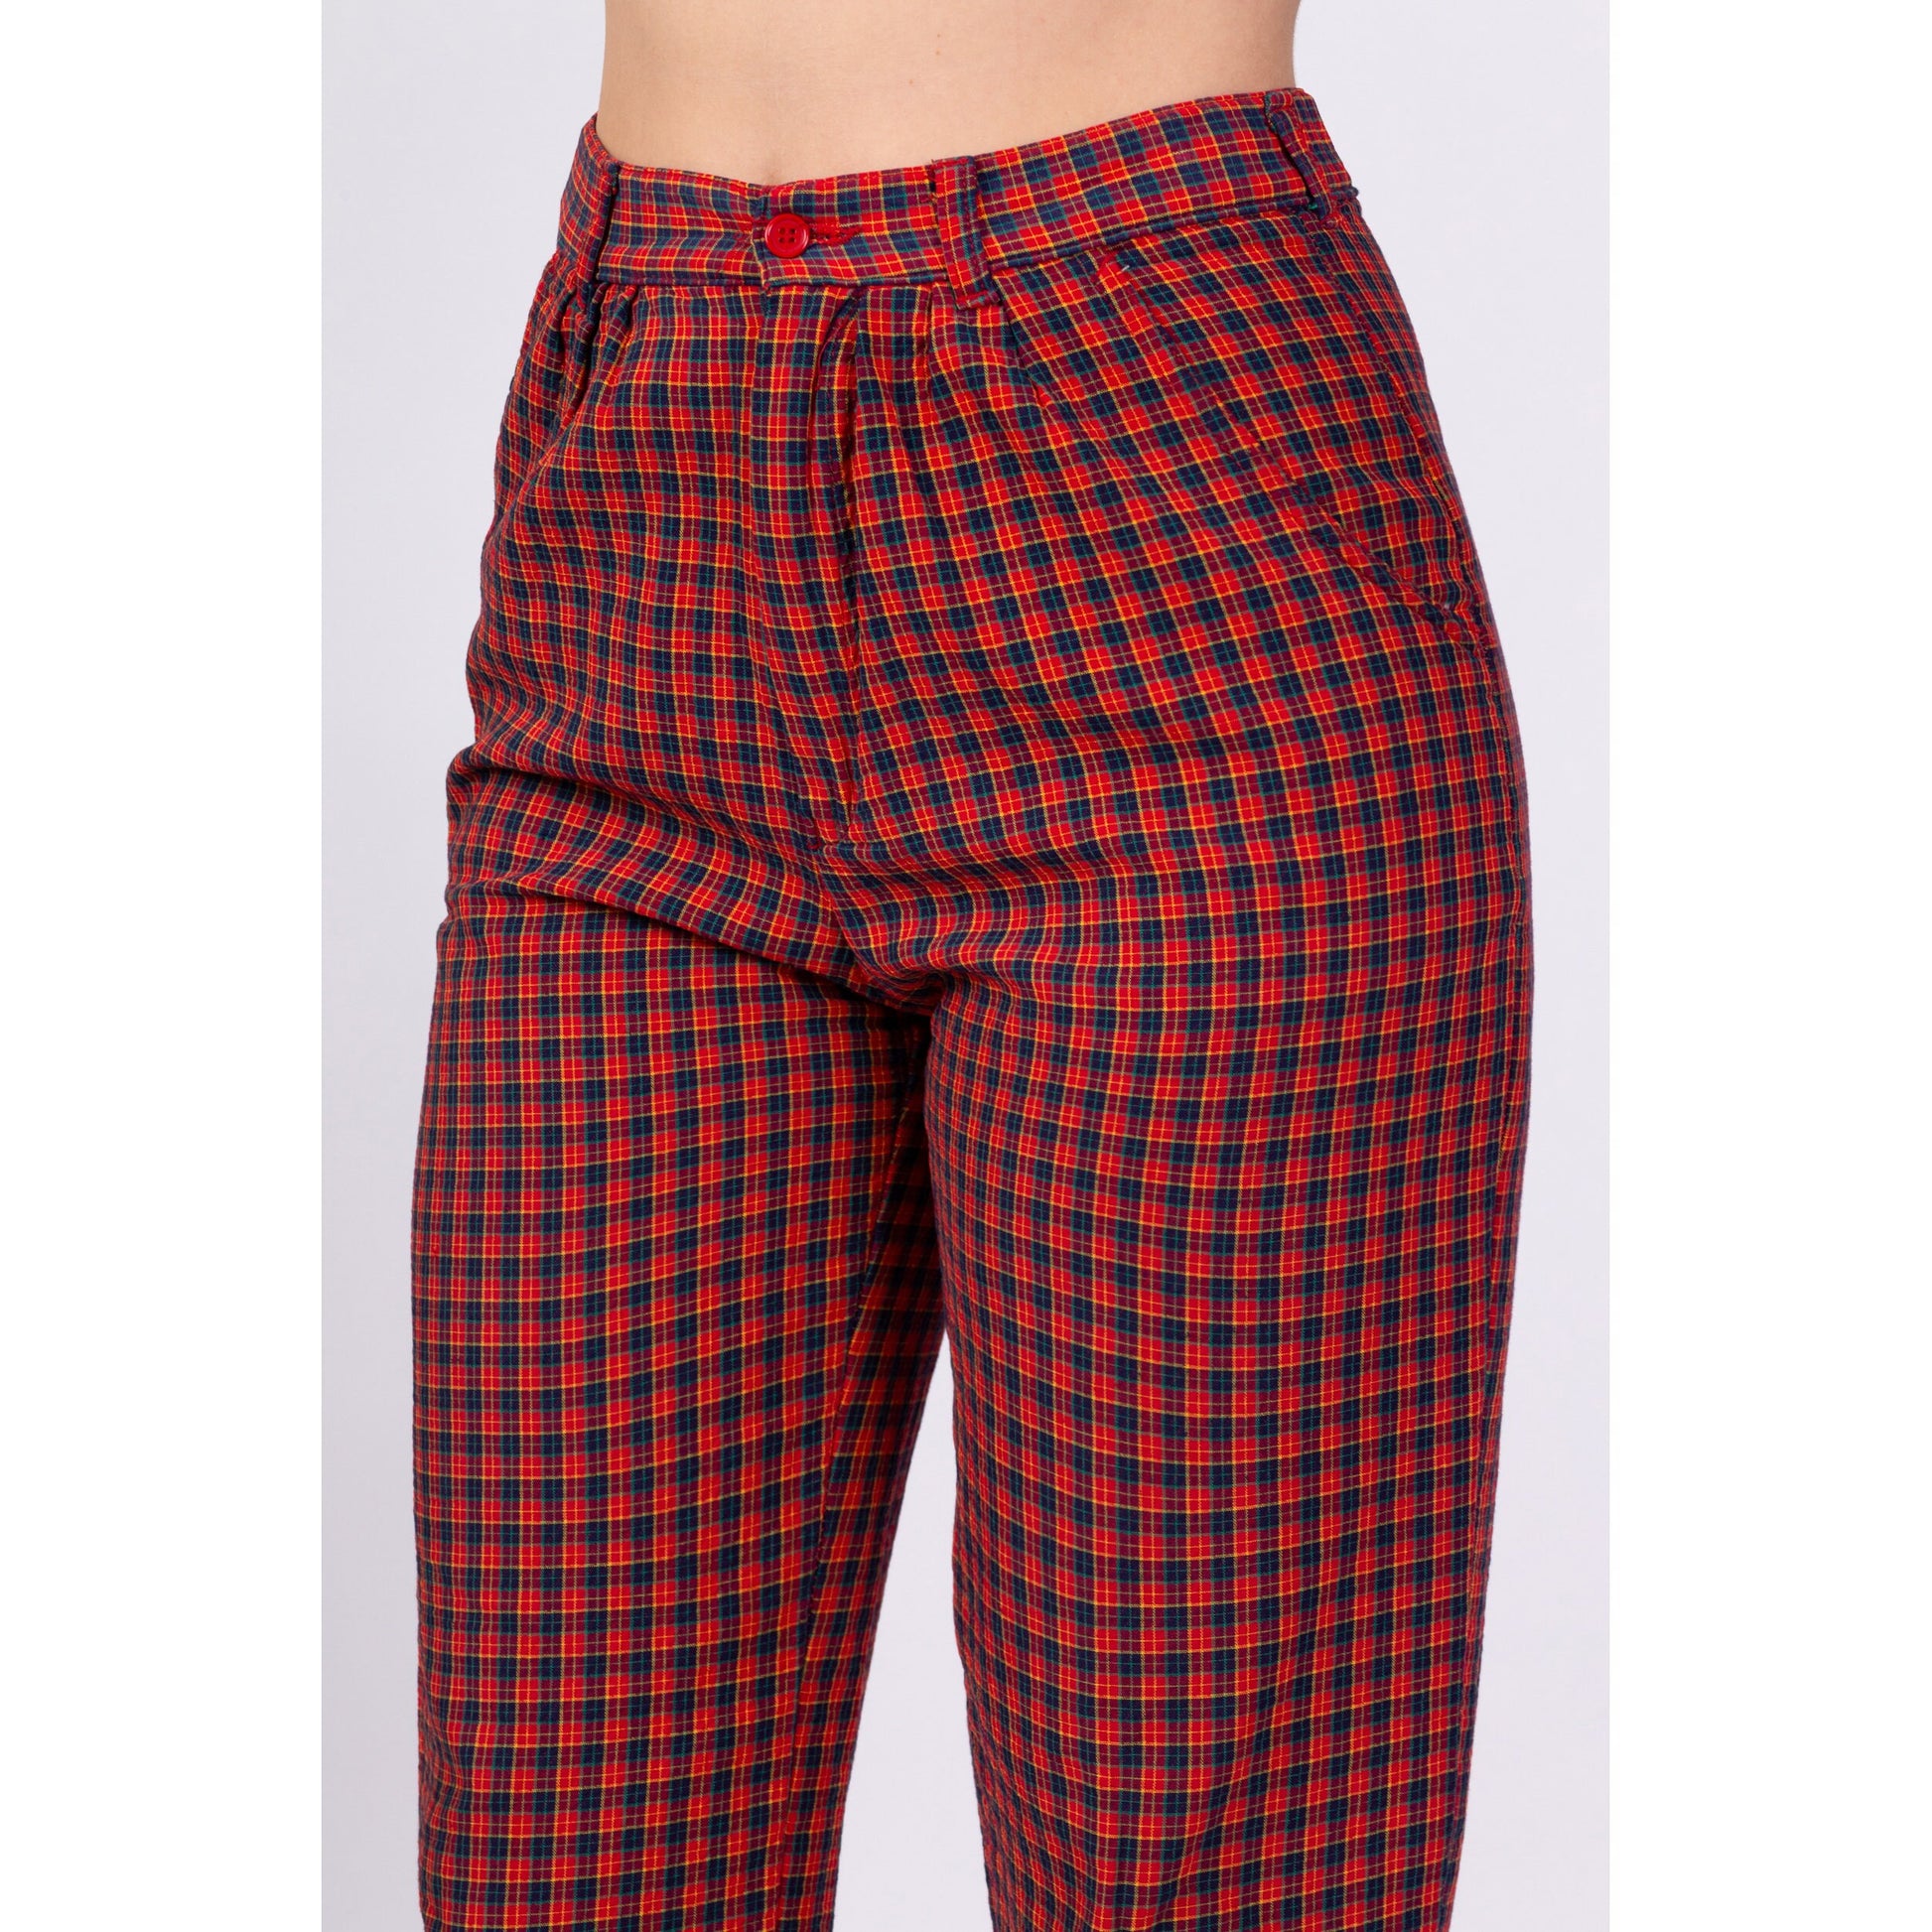 80s 90s High Waisted Red Plaid Cotton Pants - Small , 27" 